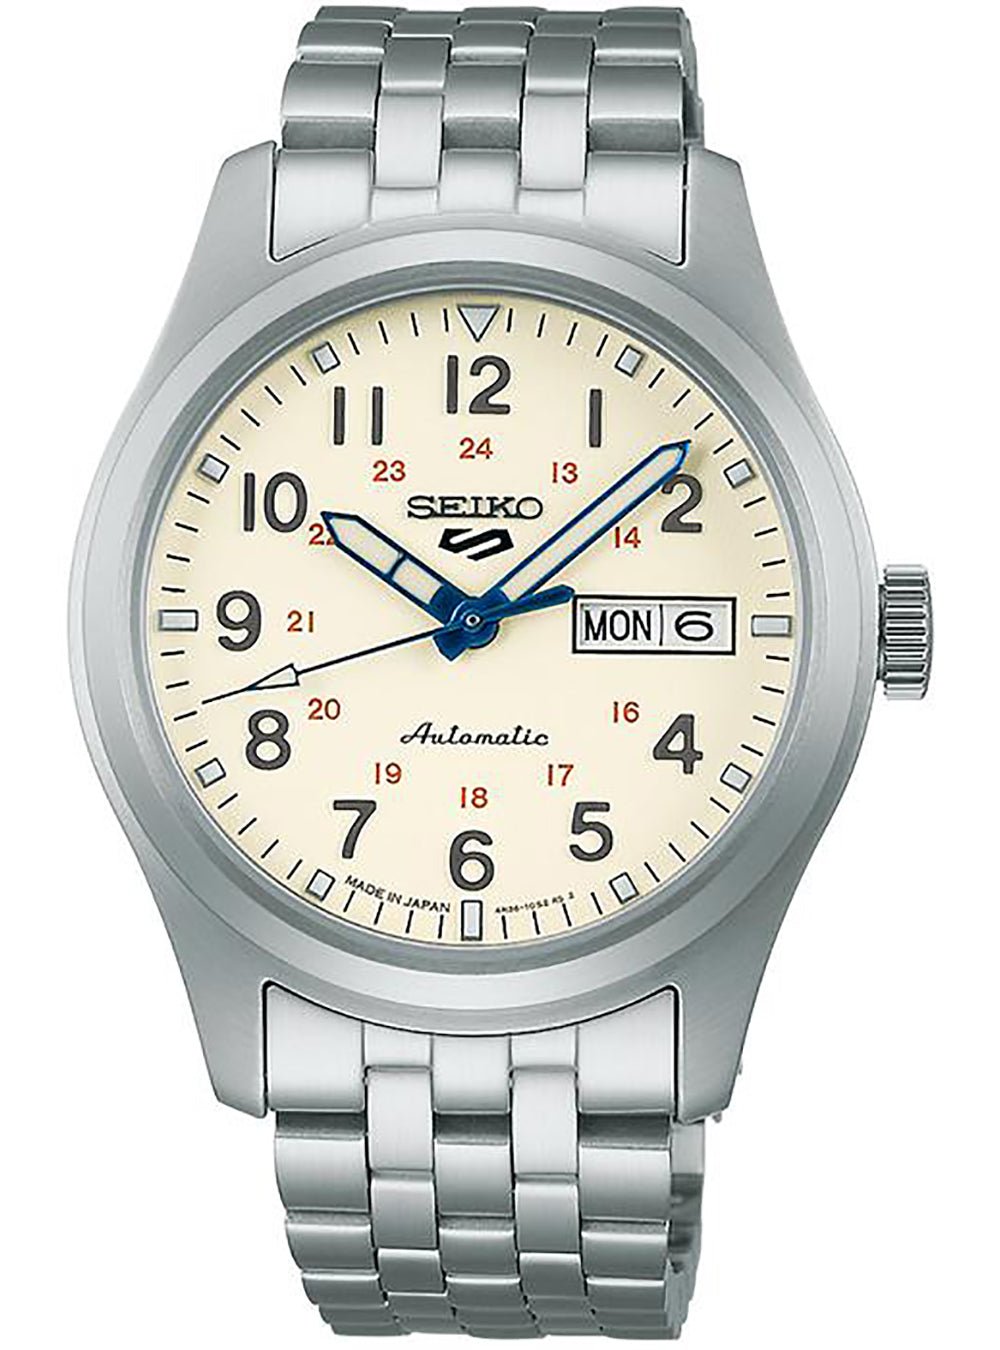 SEIKO 5 SPORTS FIELD SPORTS STYLE SEIKO WATCHMAKING 110TH ANNIVERSARY LIMITED EDITION SBSA241 MADE IN JAPAN JDMWRISTWATCHjapan-select